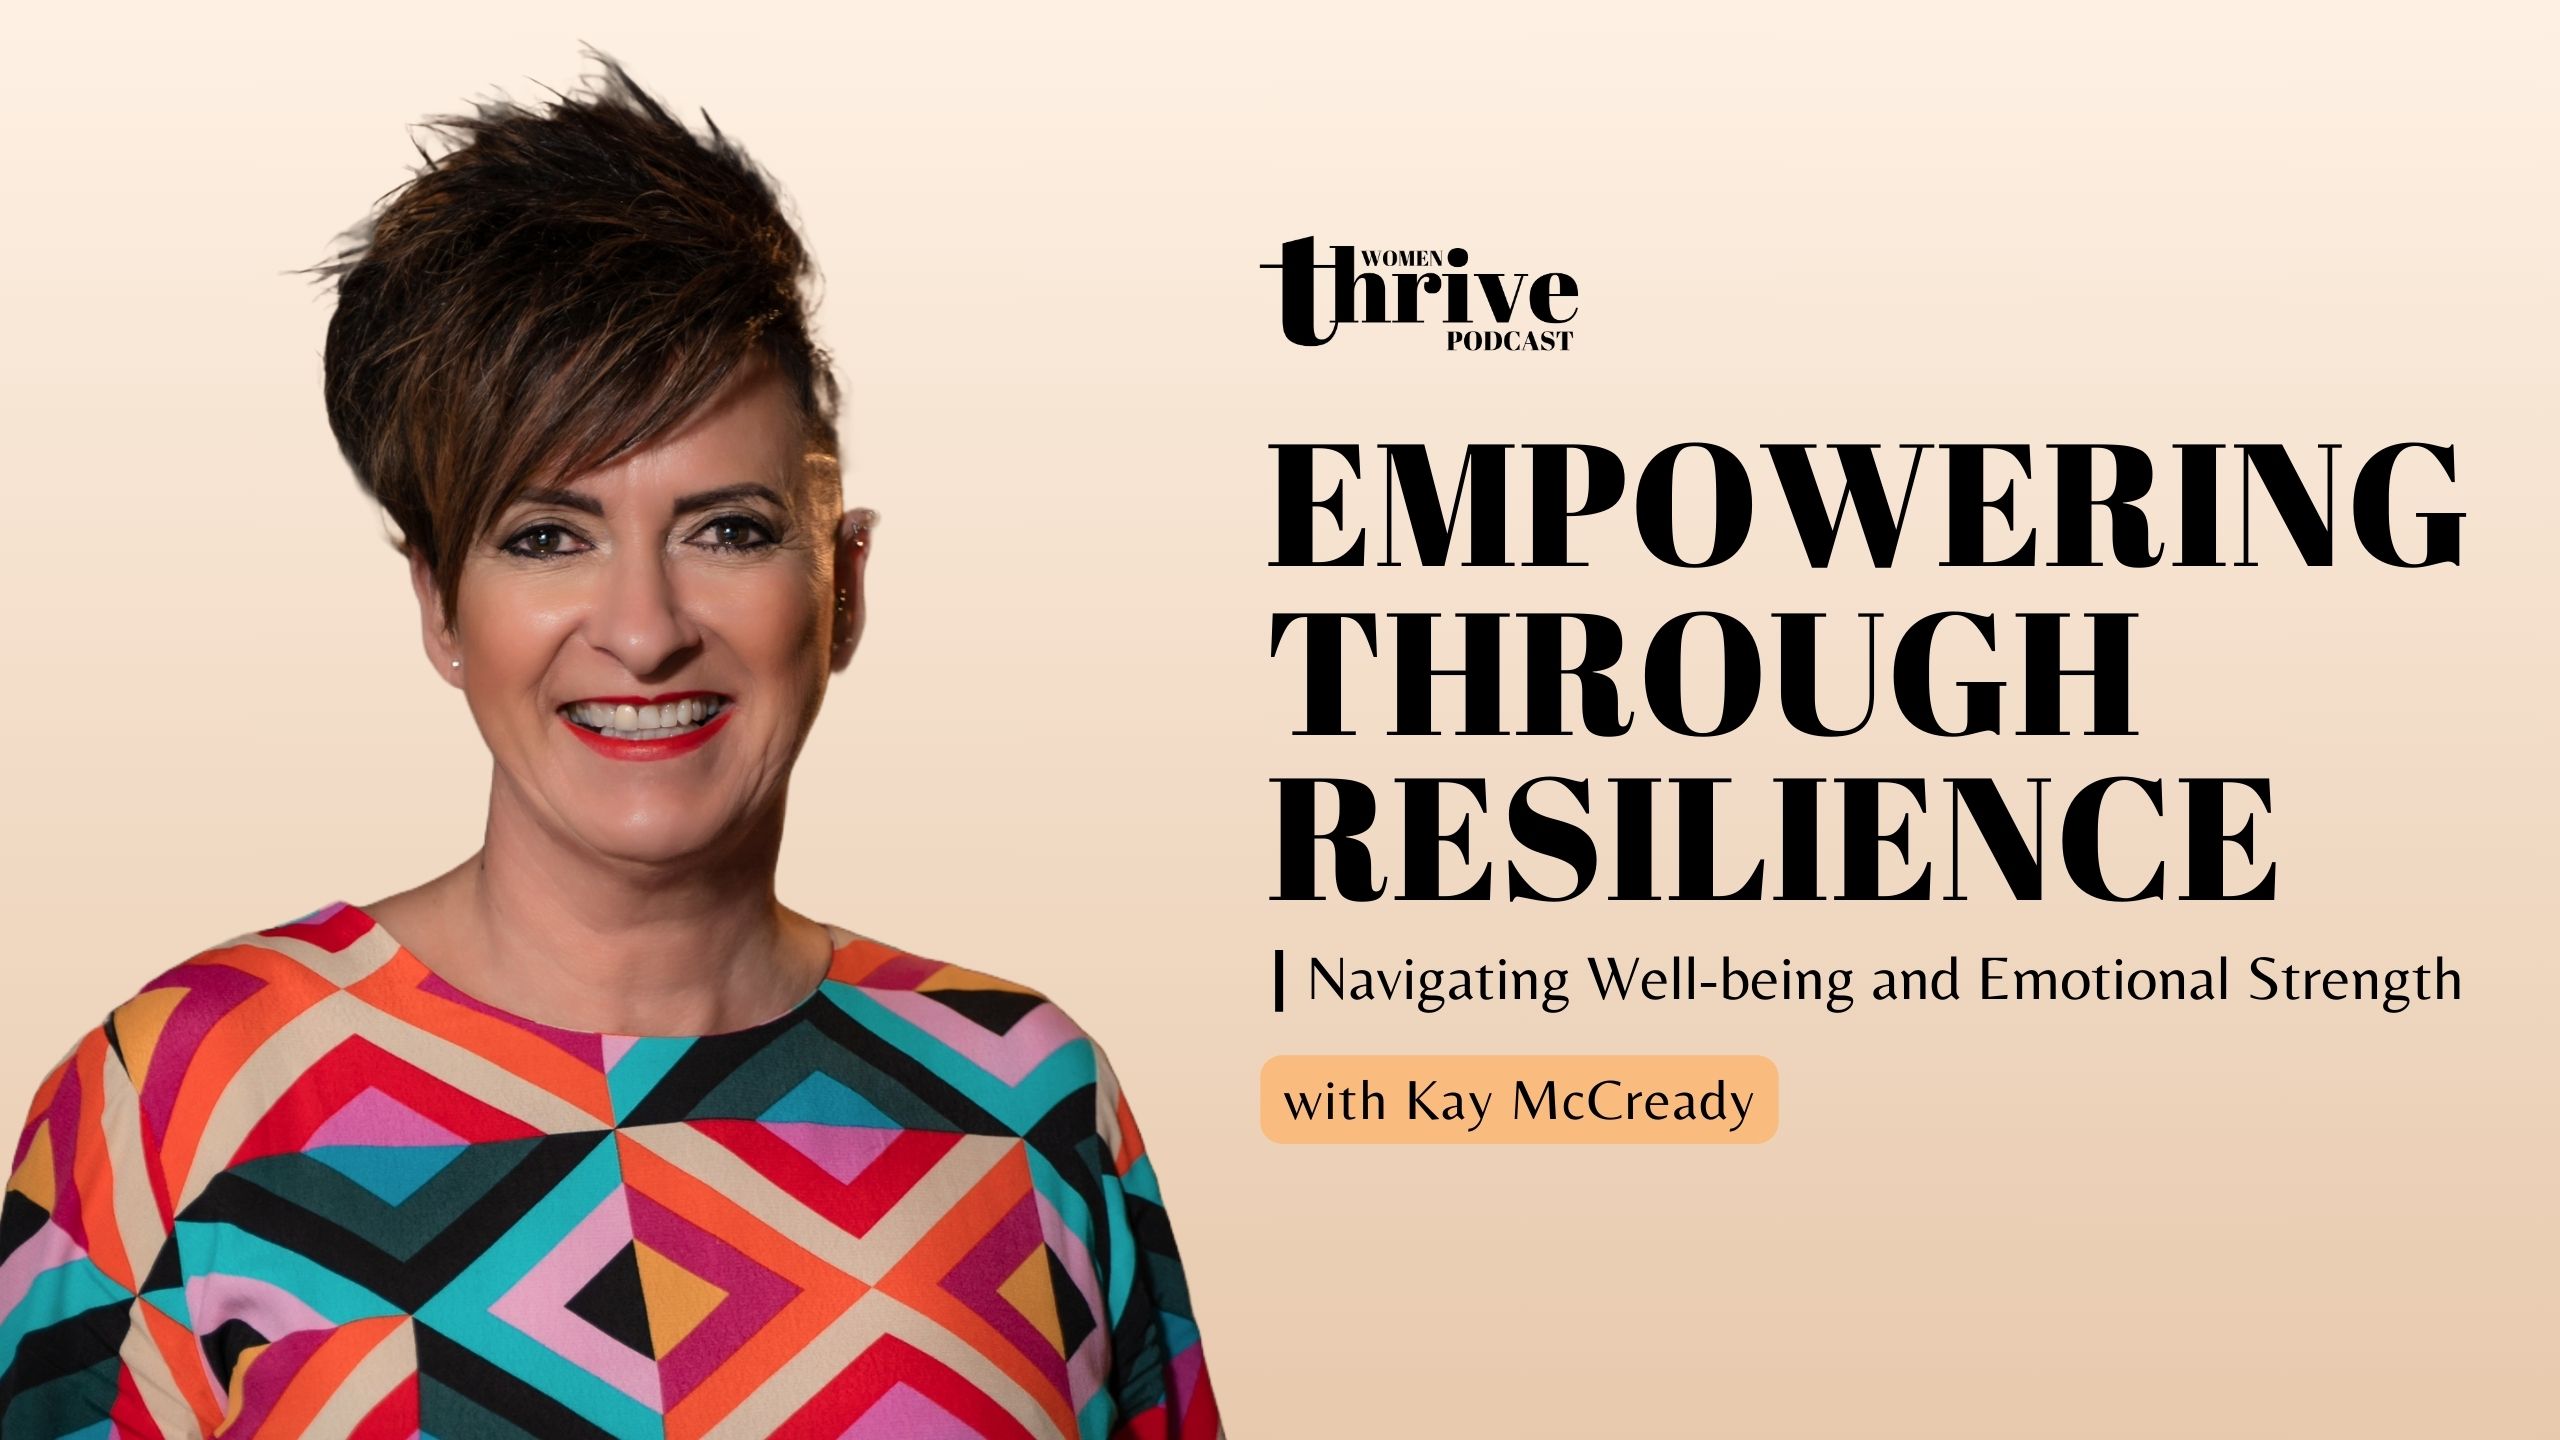 Empowering Through Resilience: Navigating Well-being and Emotional Strength with Kay McCready